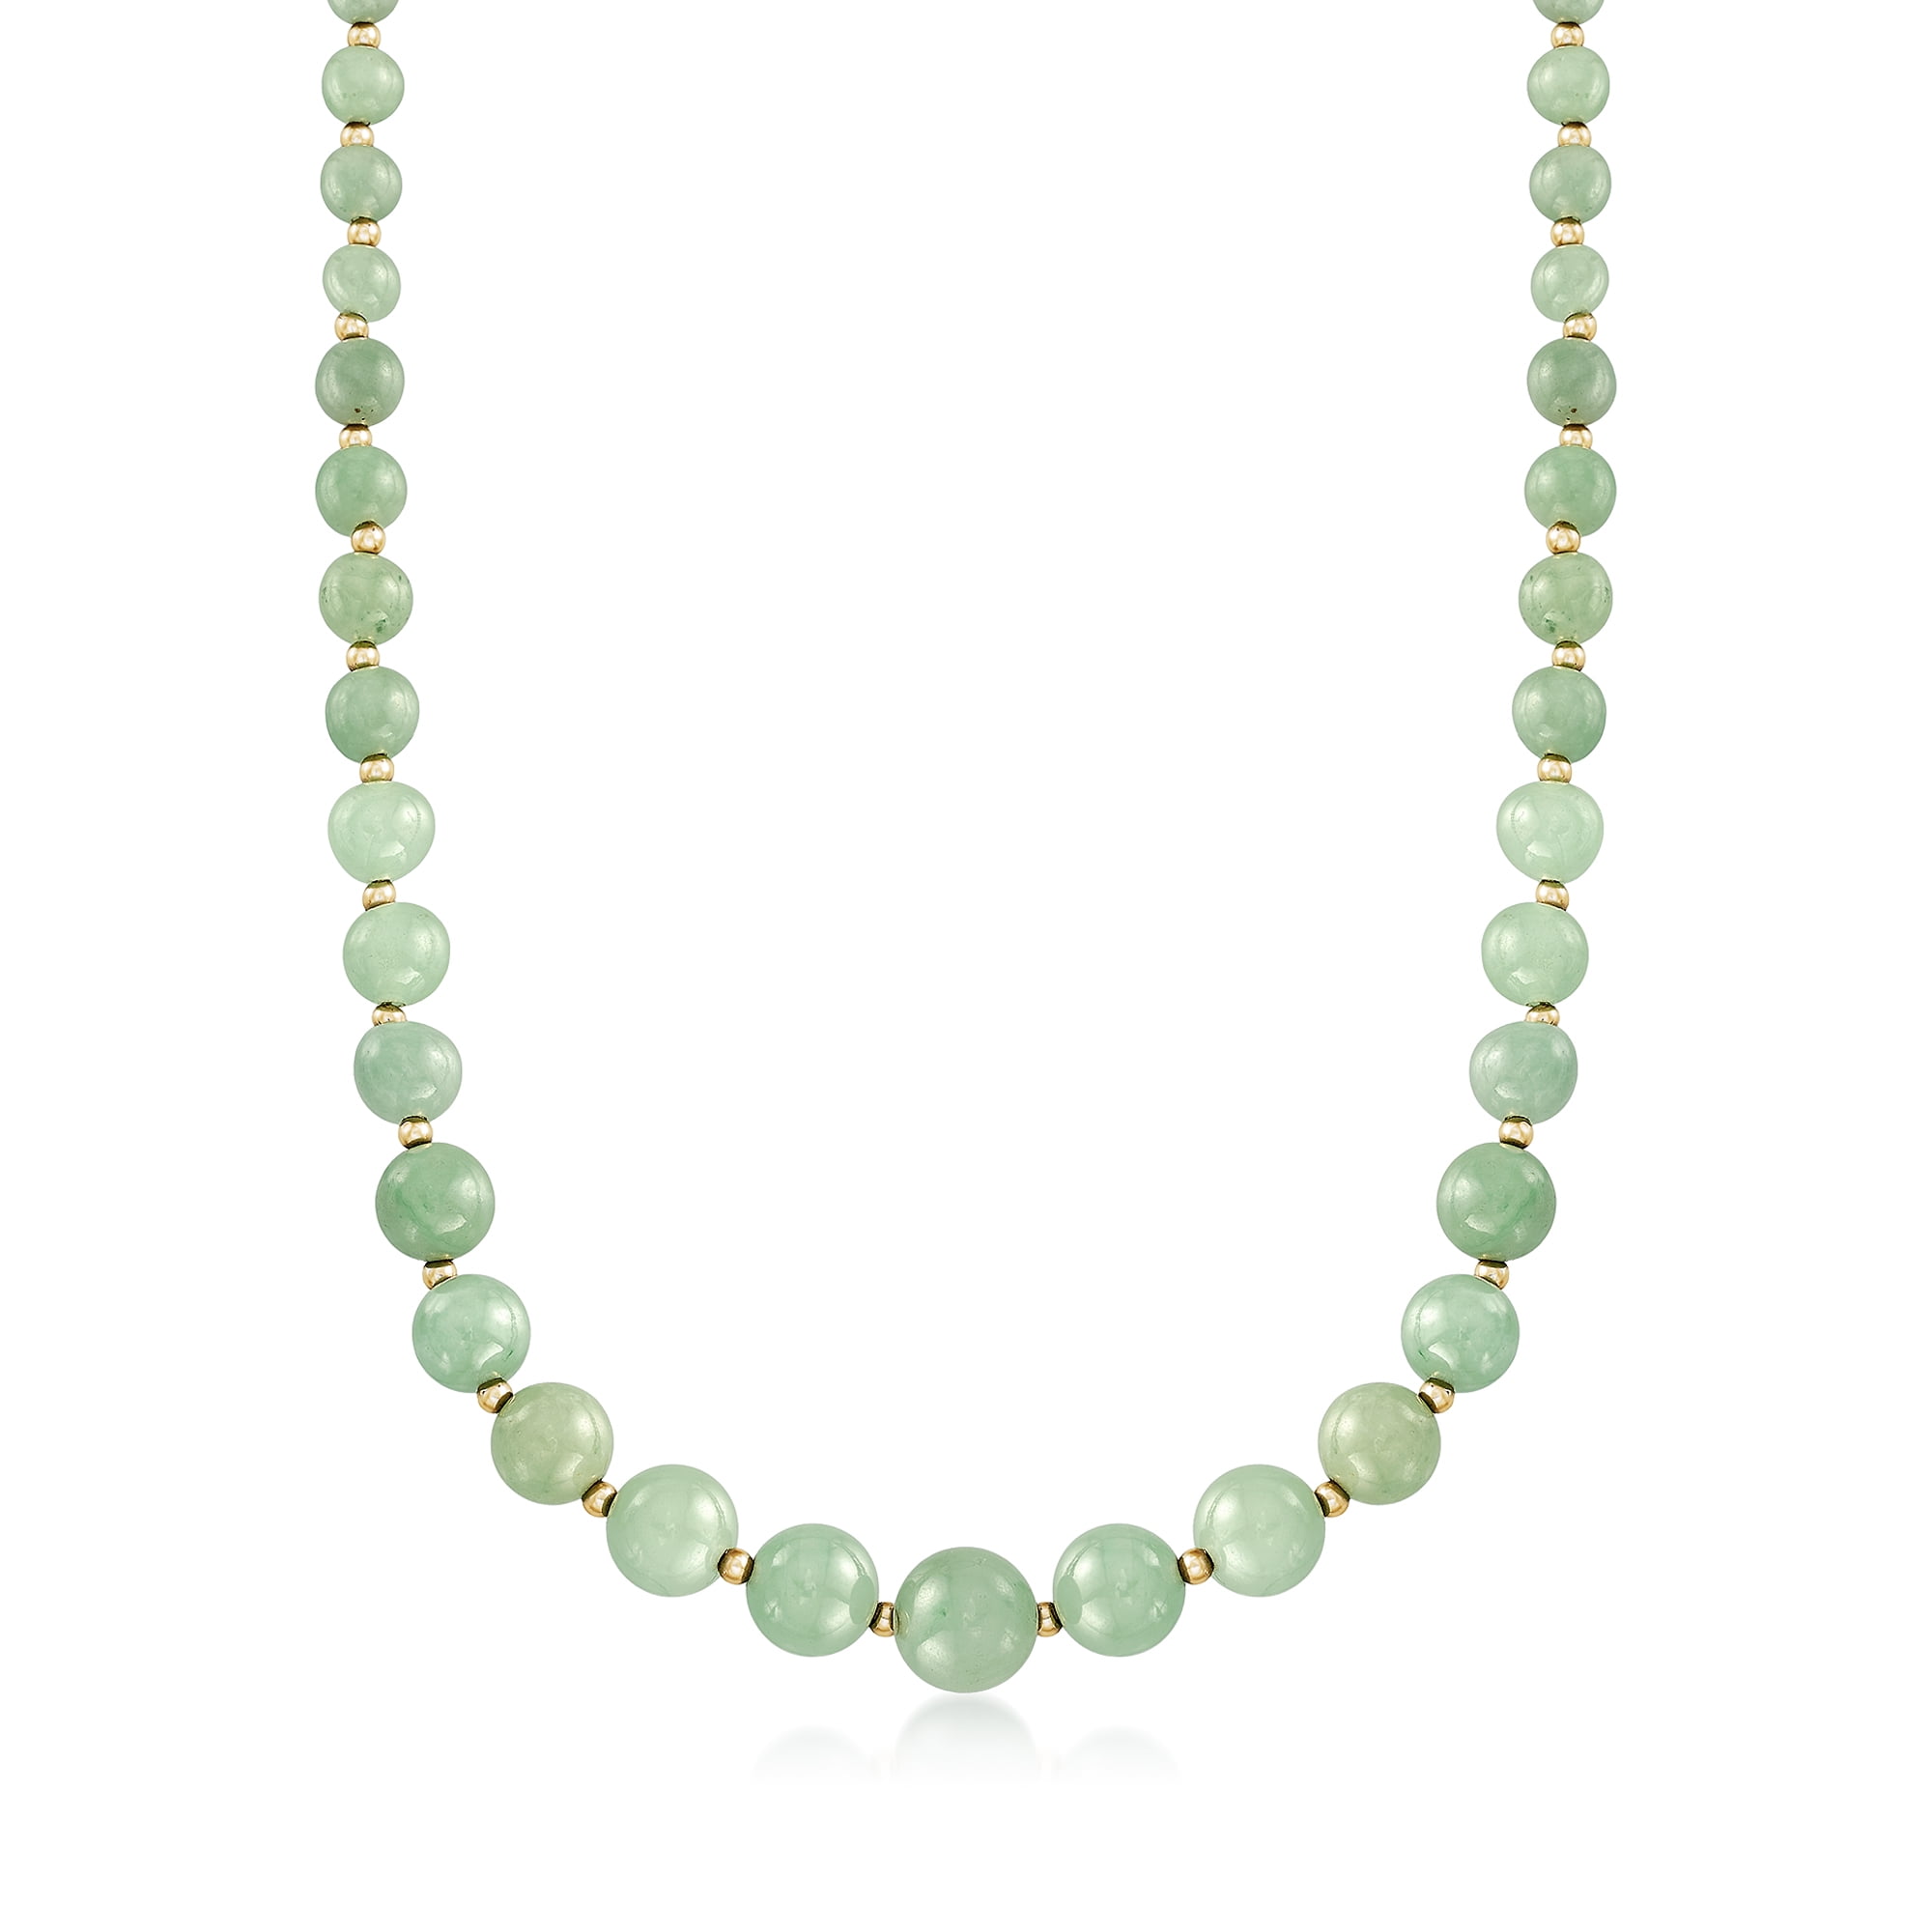 Ross-Simons 6-12mm Green Jade Bead Necklace With 14kt Yellow Gold for  Female, Adult 